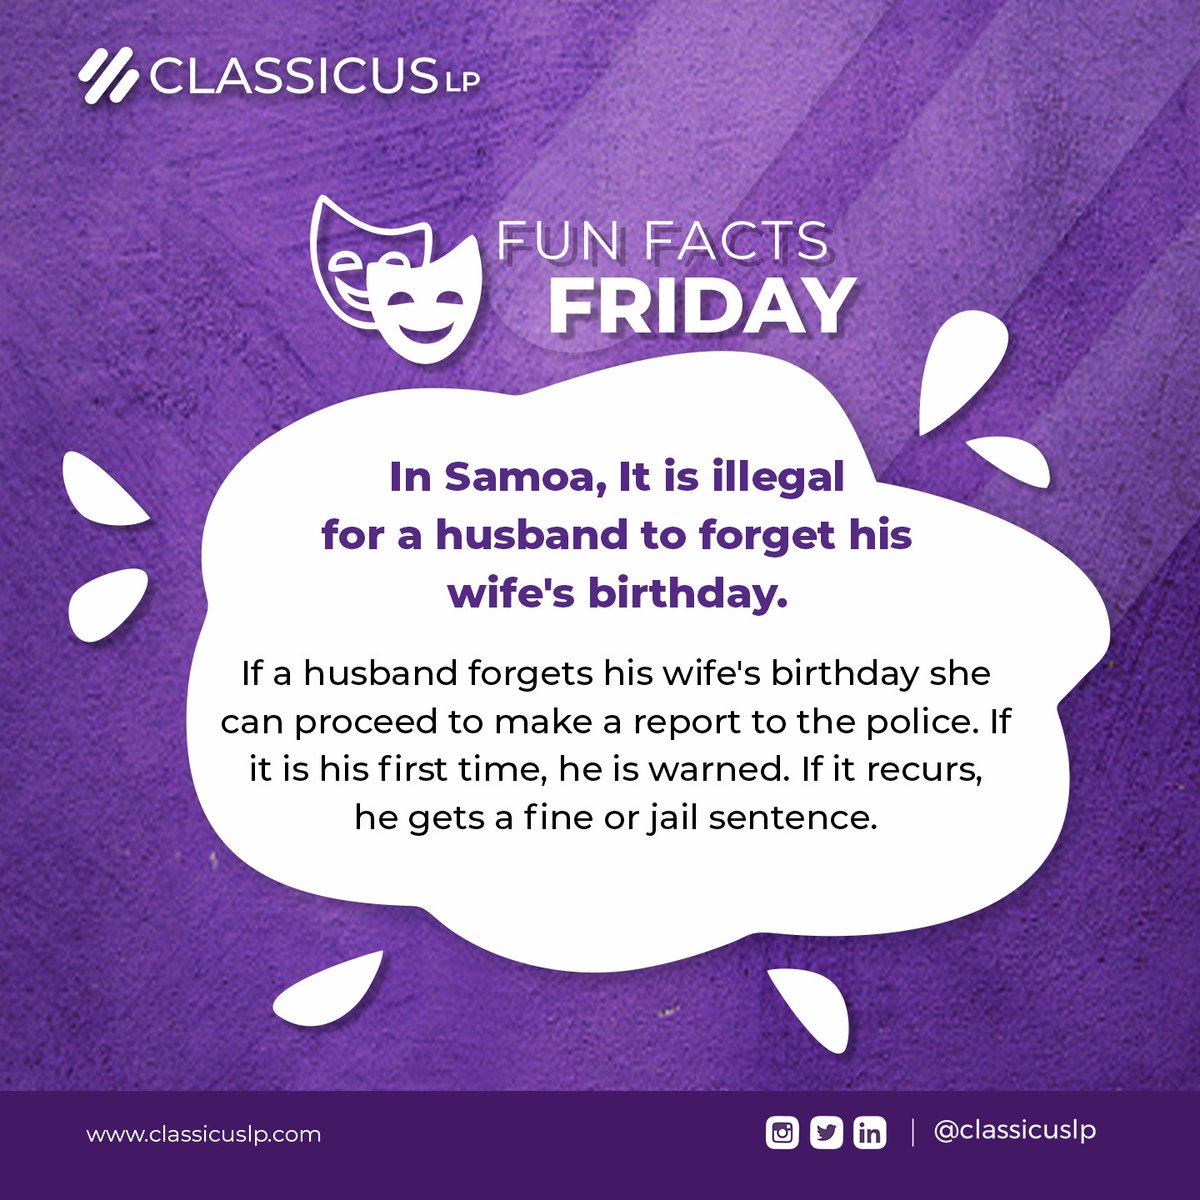 It is amazing to know how different countries operate on different rules and regulations . Some rules may seemingly look trivial but have sanctions for offenders. #weirdrules #funfacts #weirdfriday #lawfirm #solicitor #lagosbusiness #lagoslawfirm#weekend#friday#samoa#tgif#